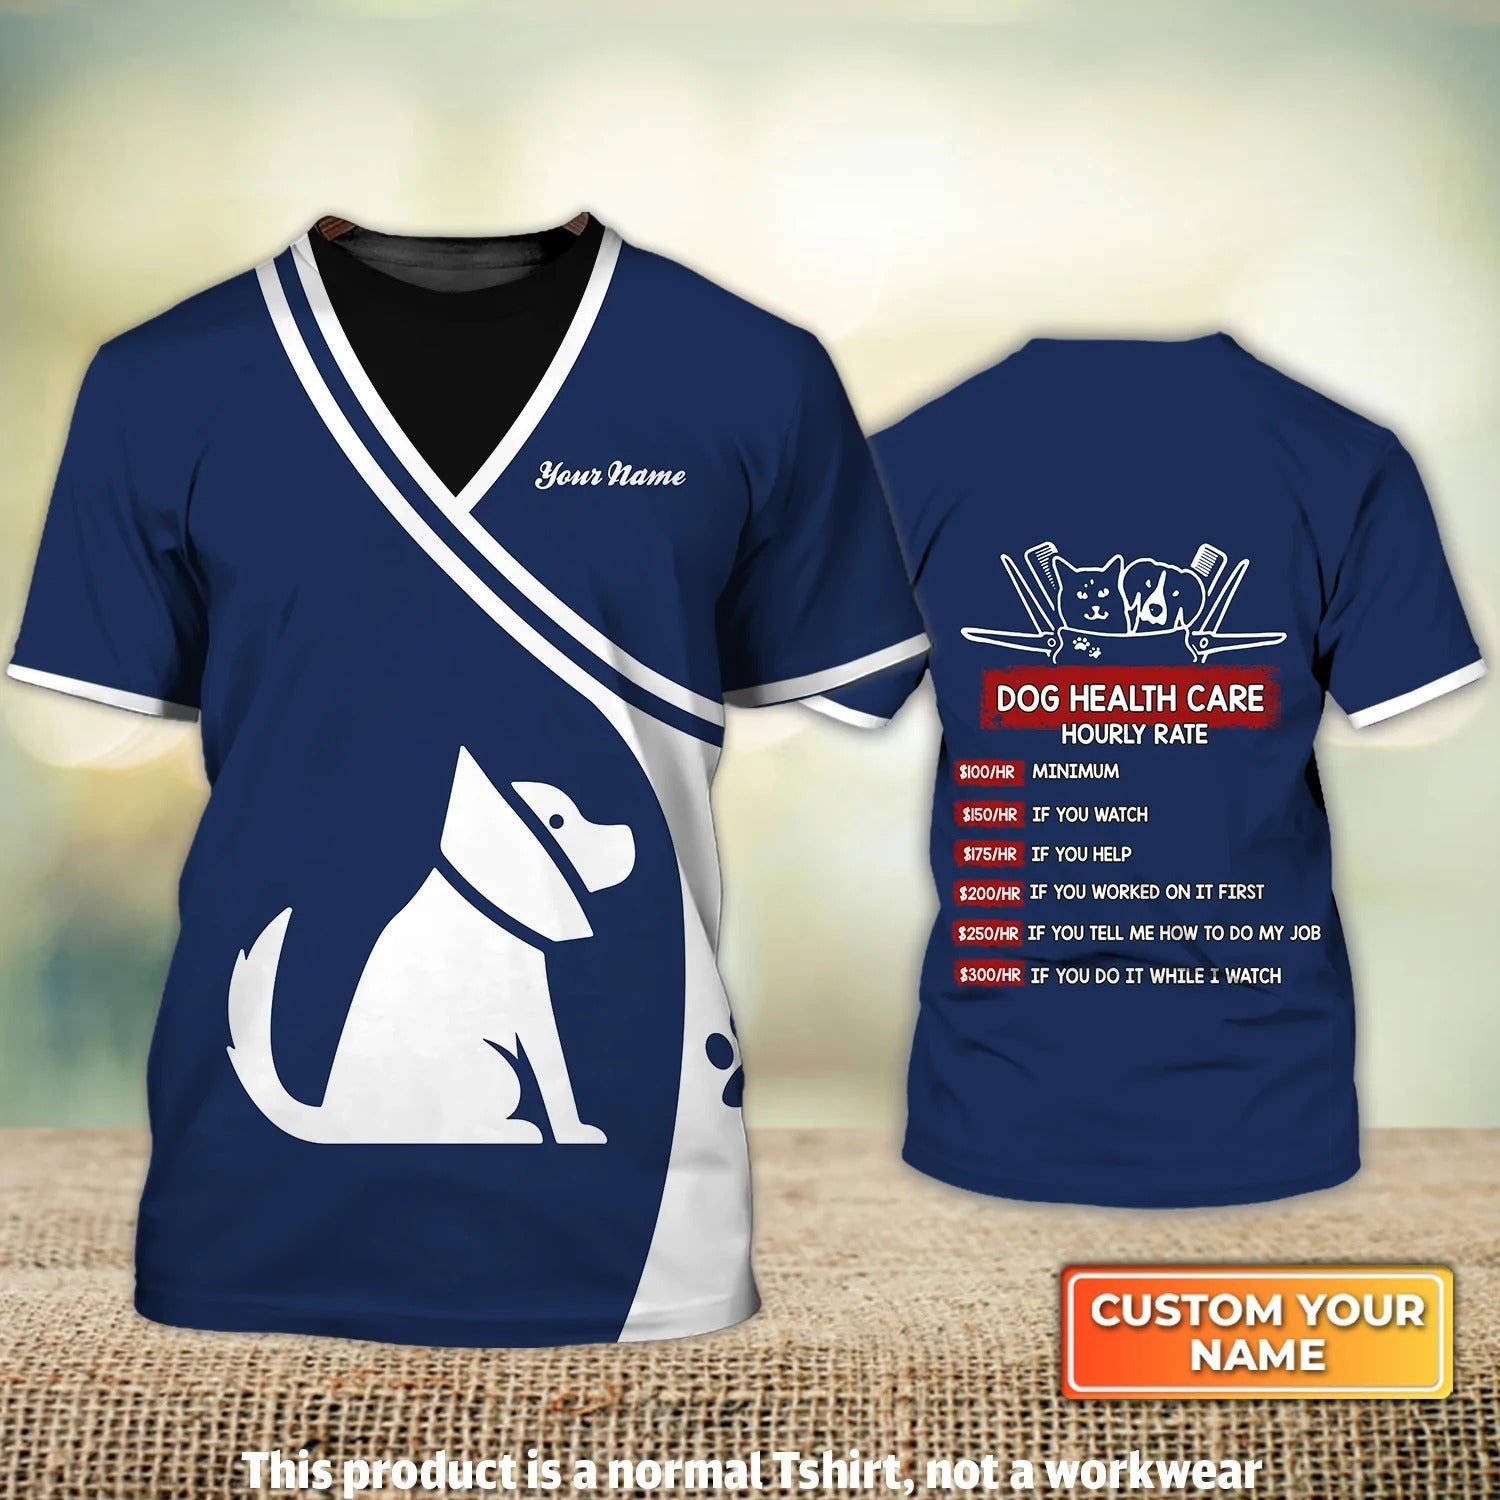 Personalized Name 3D Tshirt Dog Health Care Dog Care Emplyee Hourly Rate